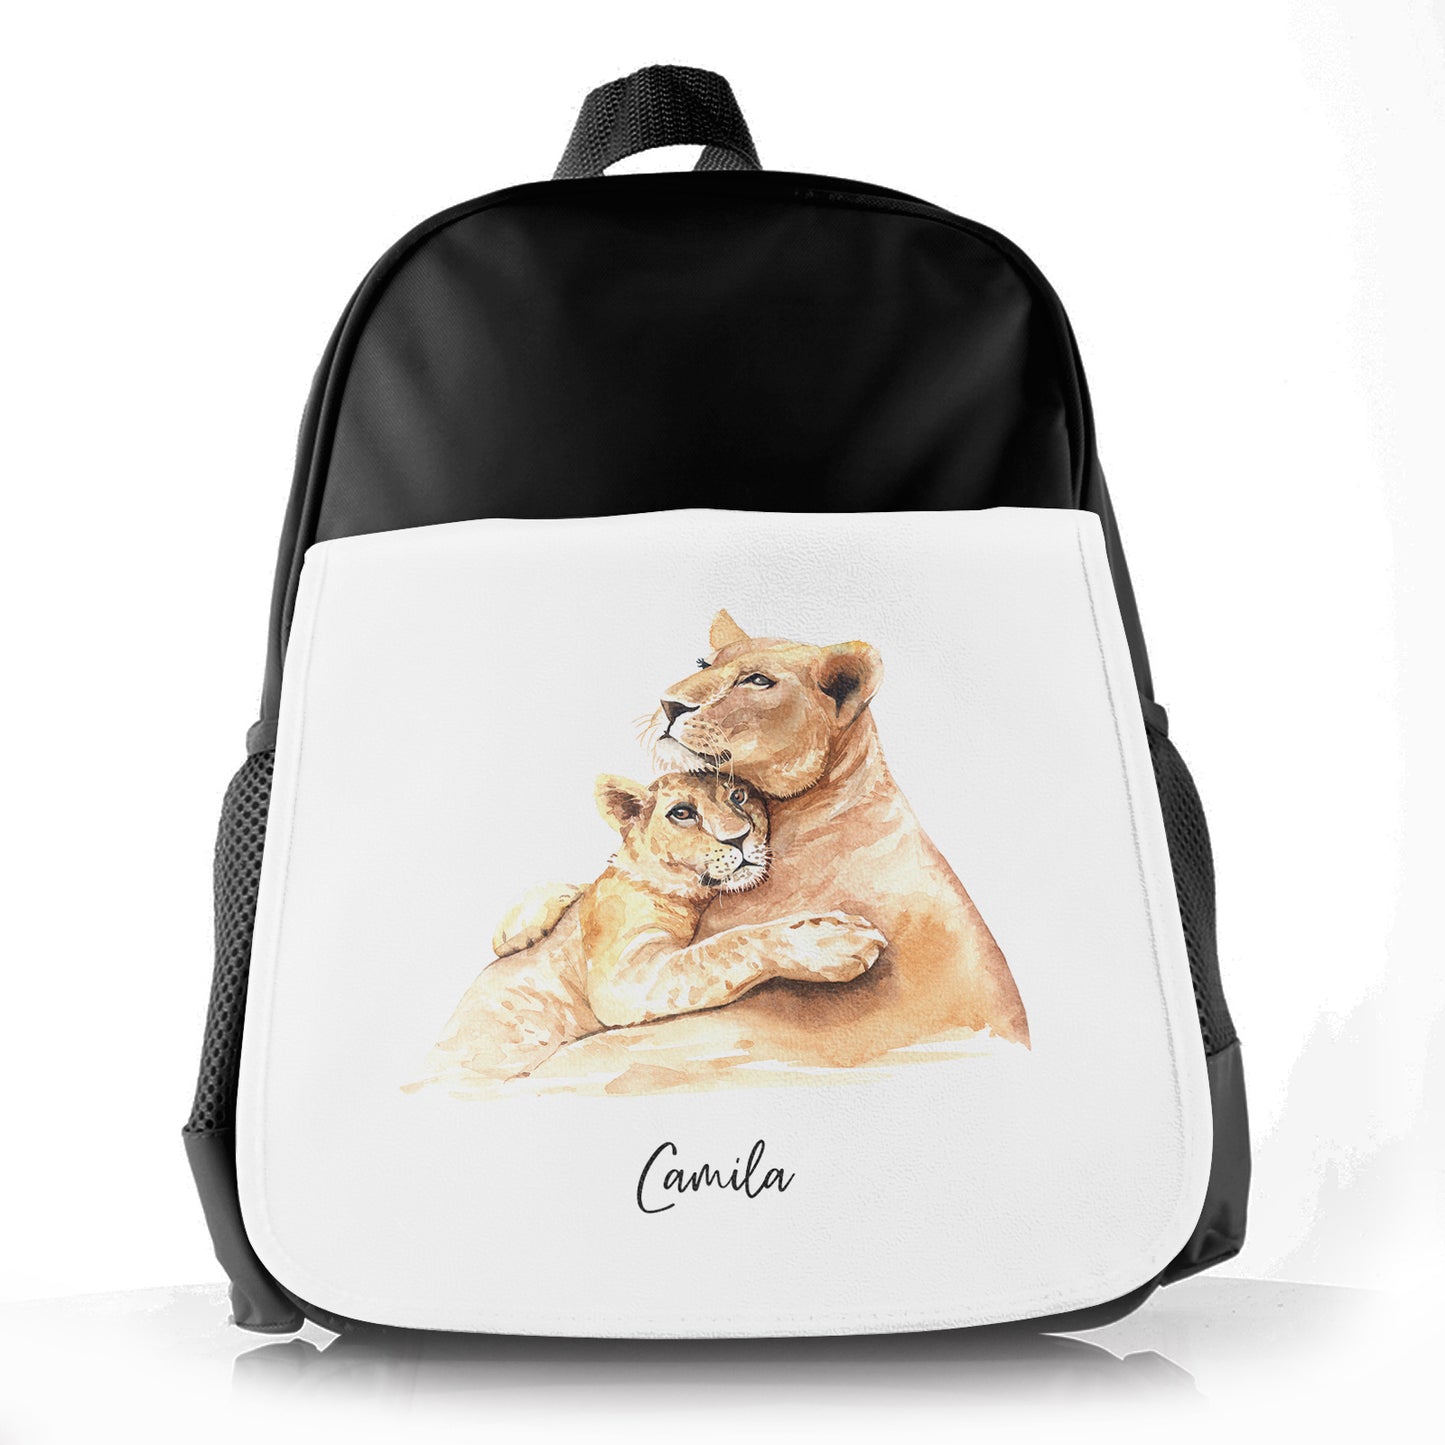 Personalised School Bag with Welcoming Text and Embracing Mum and Baby Lions